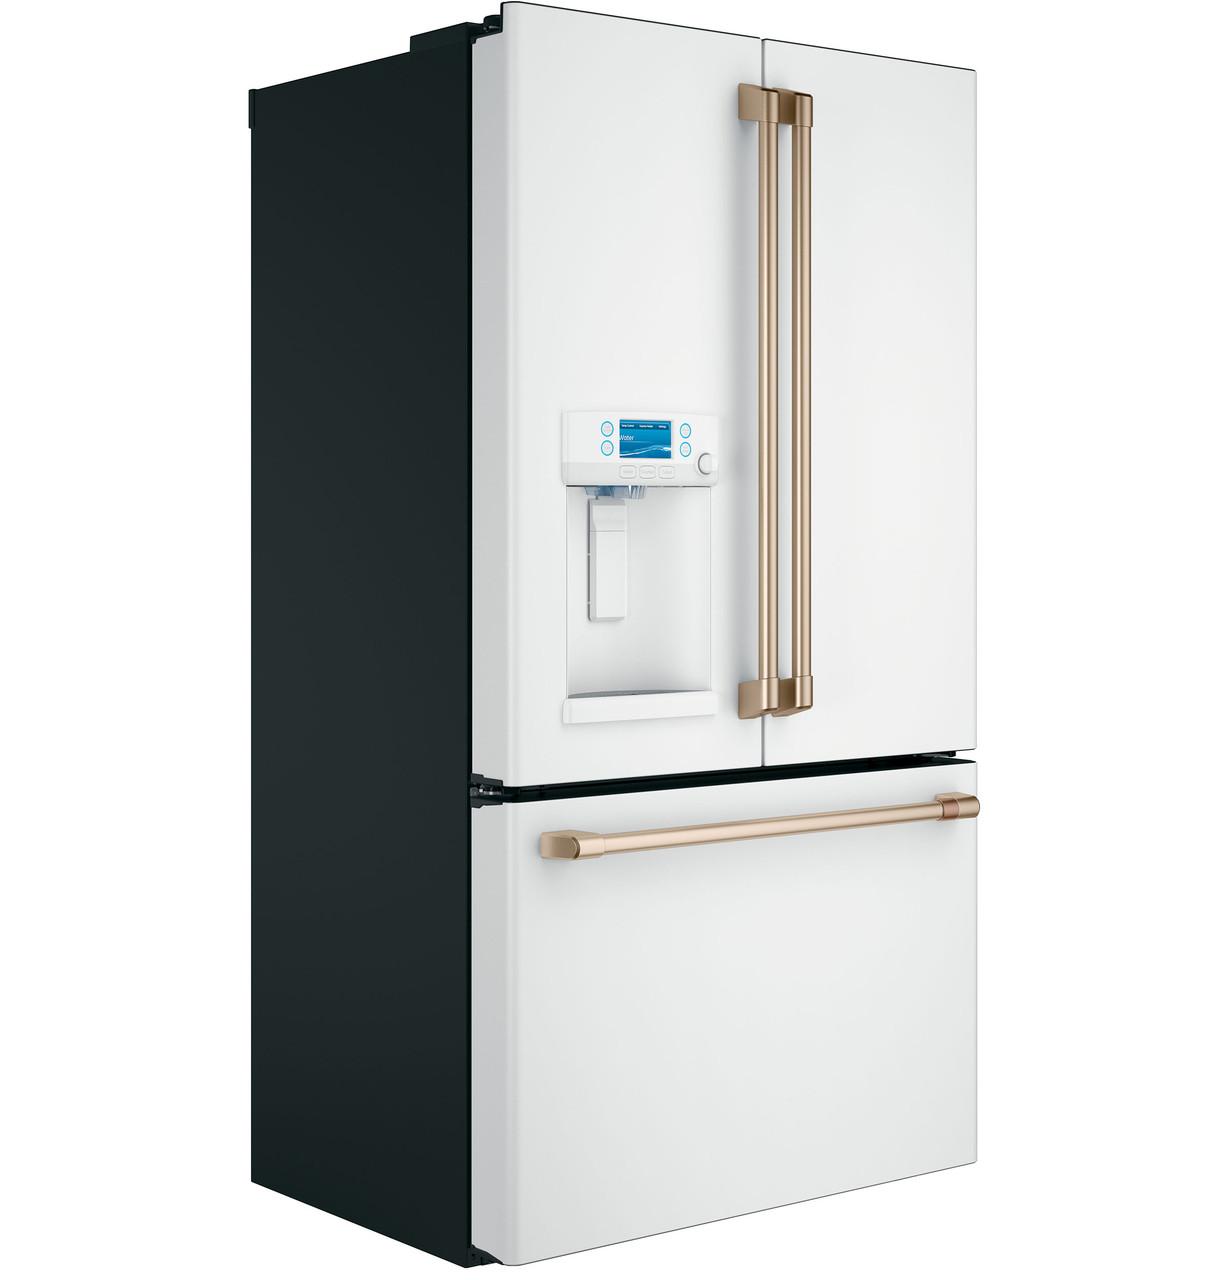 Cafe Cye22tpm 36" Wide 22.2 Cu. Ft. Counter Depth French Door Refrigerator - Matte White / - image 3 of 5